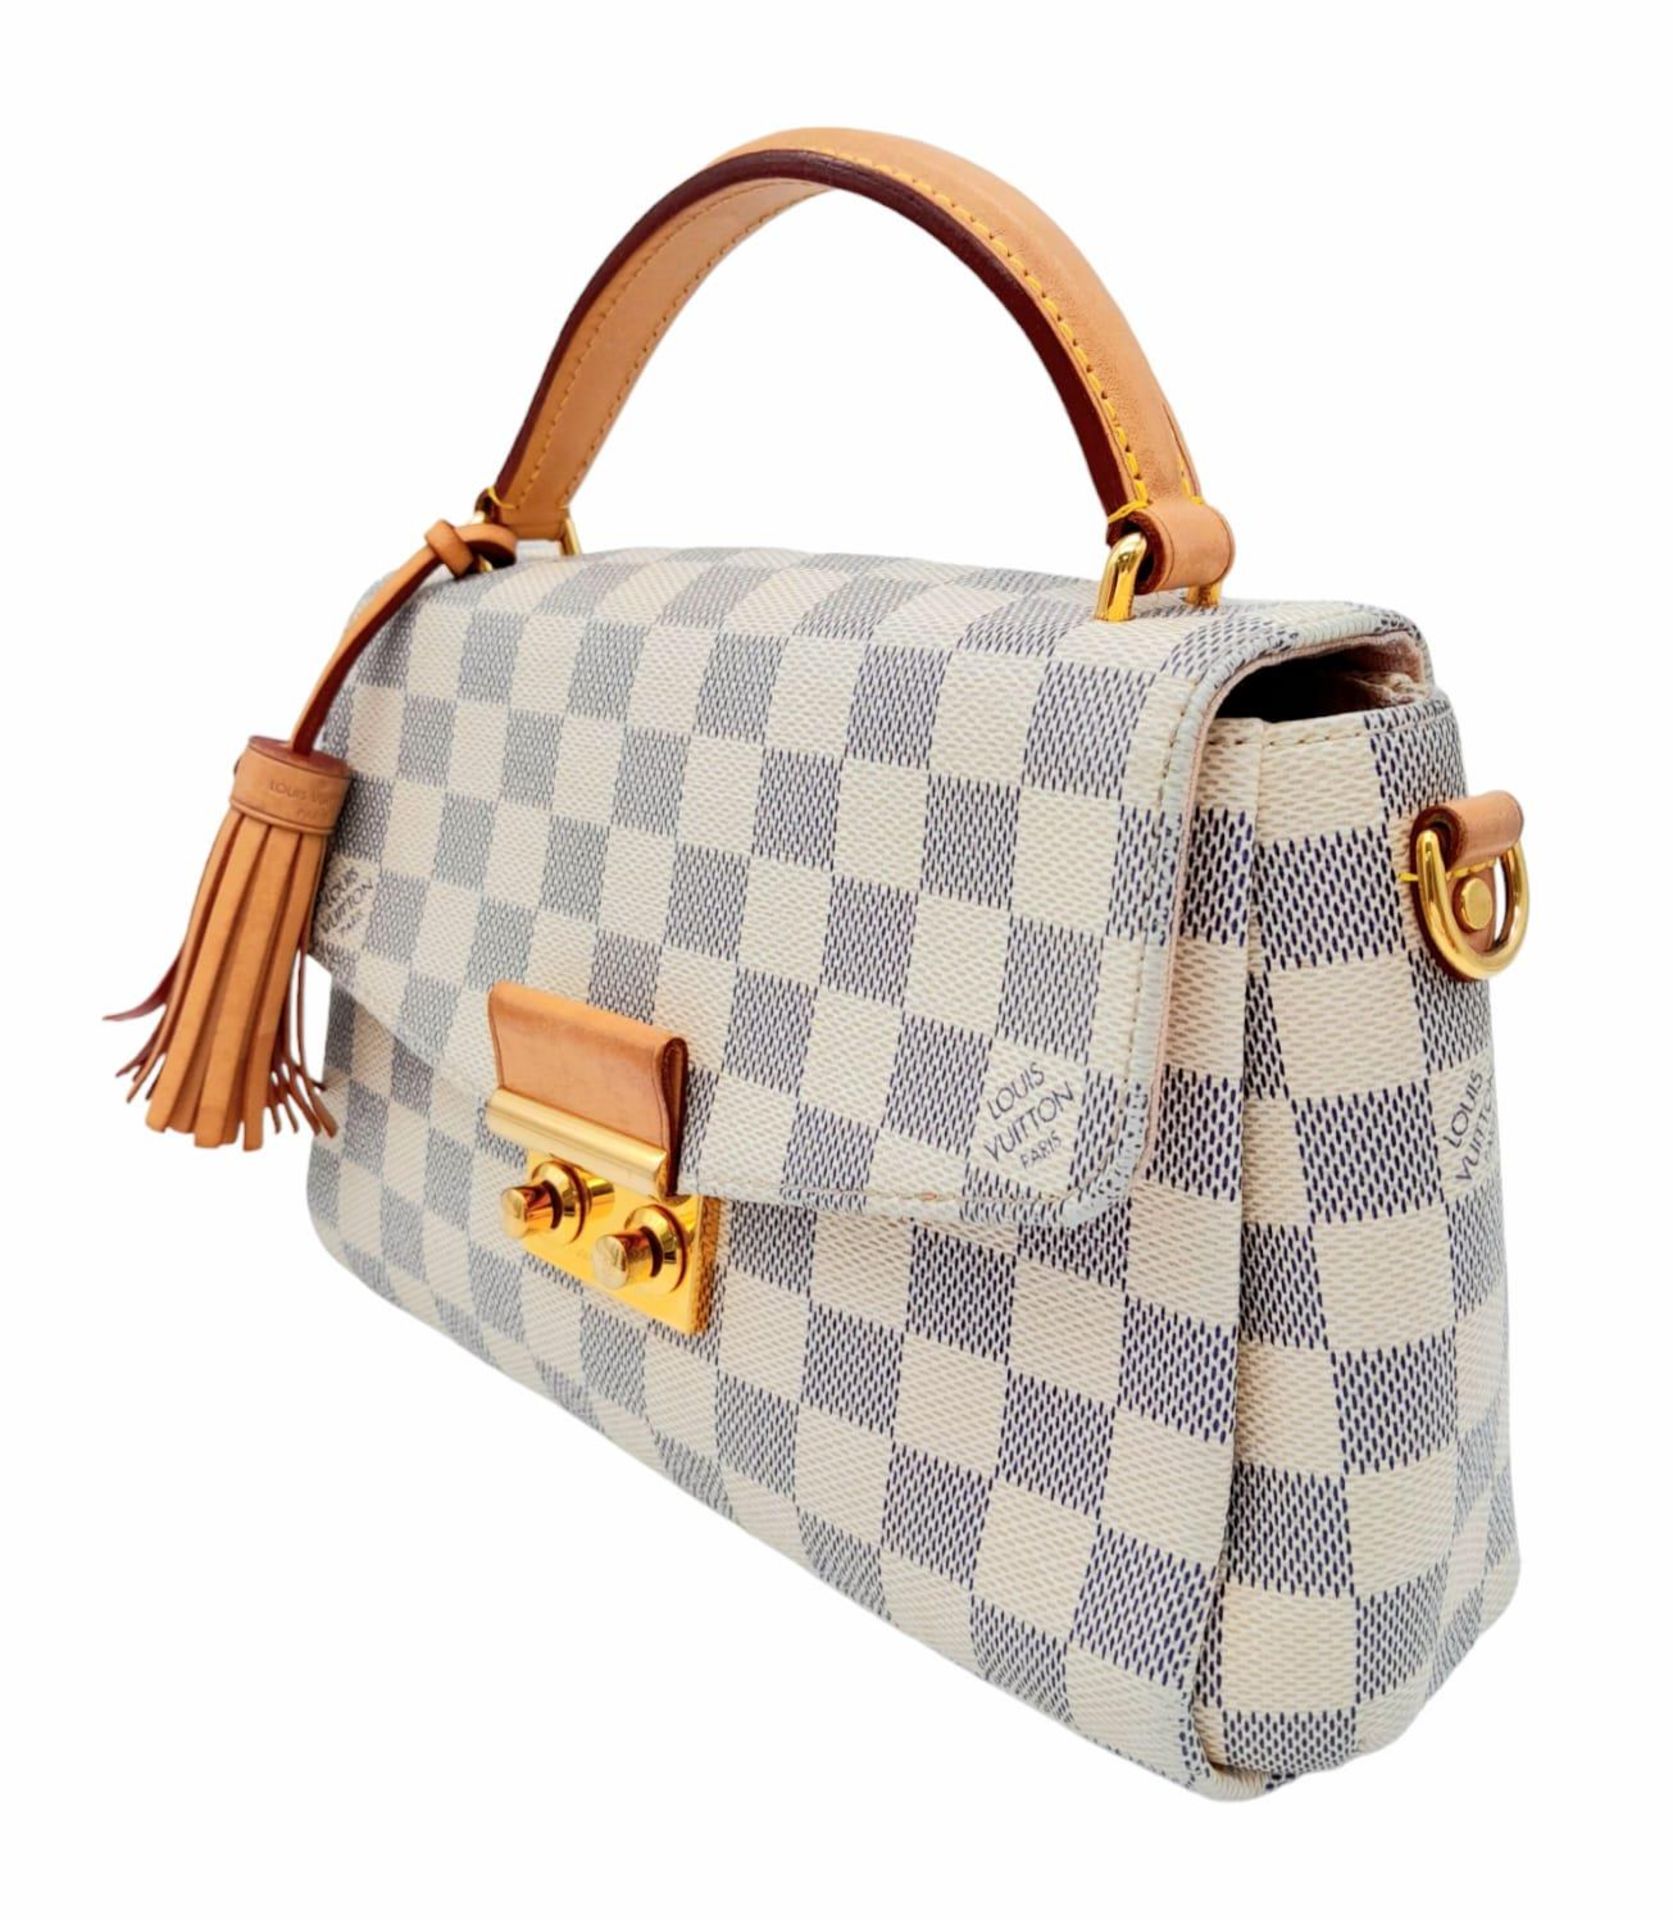 A Louis Vuitton damier canvas Croisette handbag in cream/blue, interior is baby pink. Leather handle - Image 4 of 12